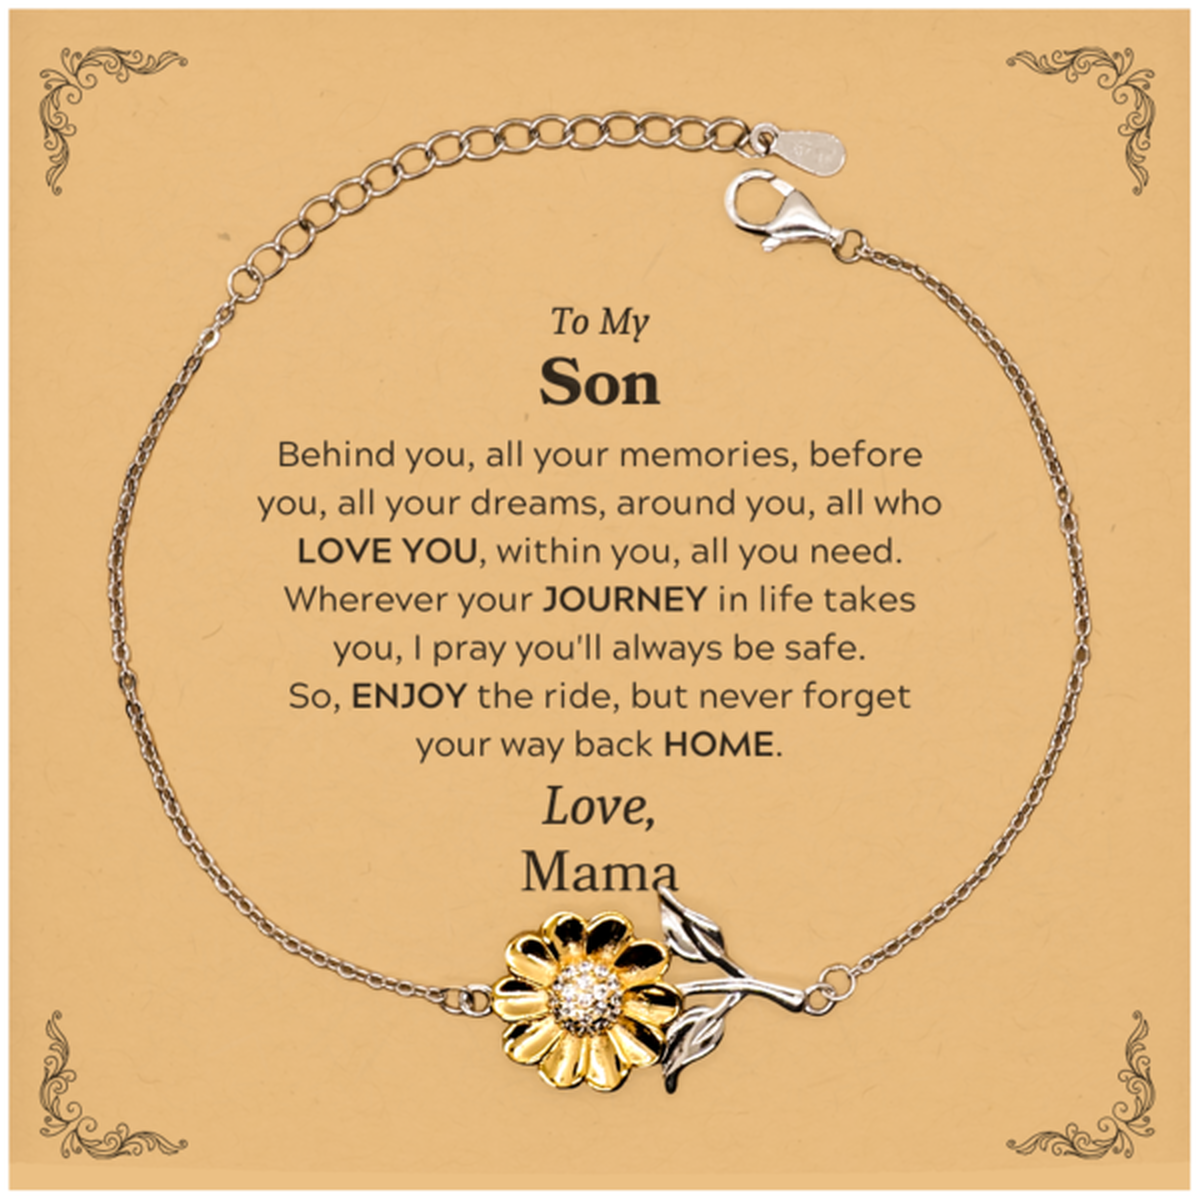 To My Son Graduation Gifts from Mama, Son Sunflower Bracelet Christmas Birthday Gifts for Son Behind you, all your memories, before you, all your dreams. Love, Mama